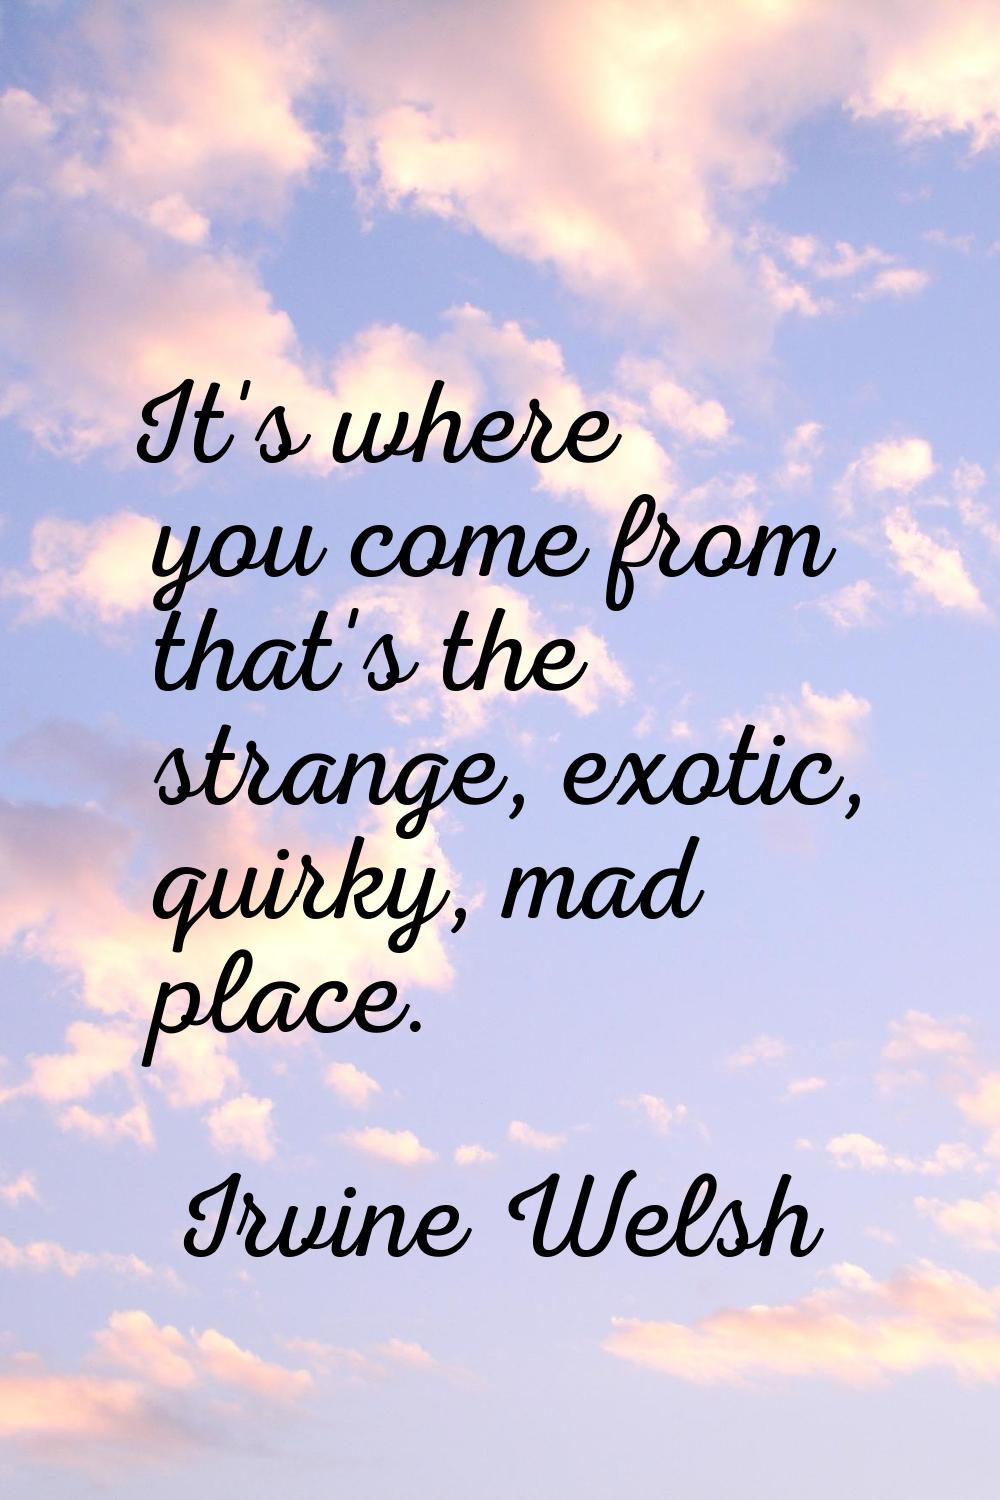 It's where you come from that's the strange, exotic, quirky, mad place.